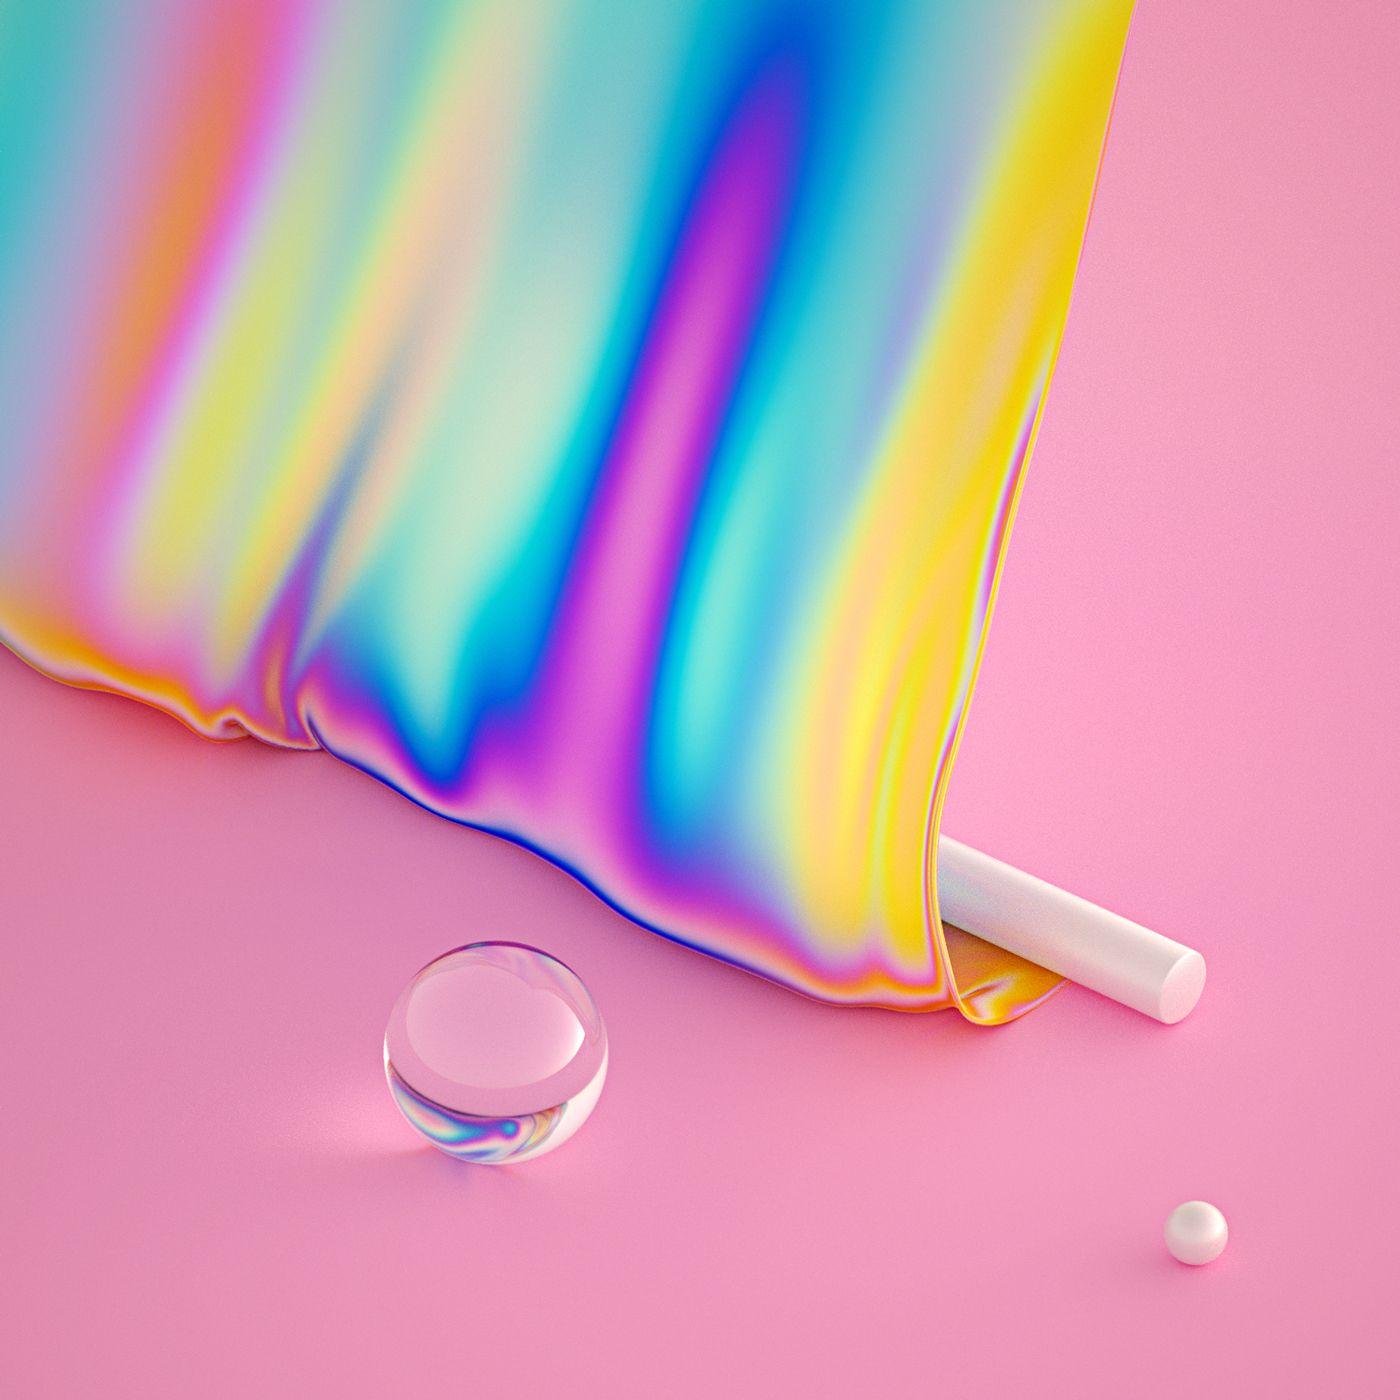 Oh my Pastel!Another series exploring cloth simulation with yummy